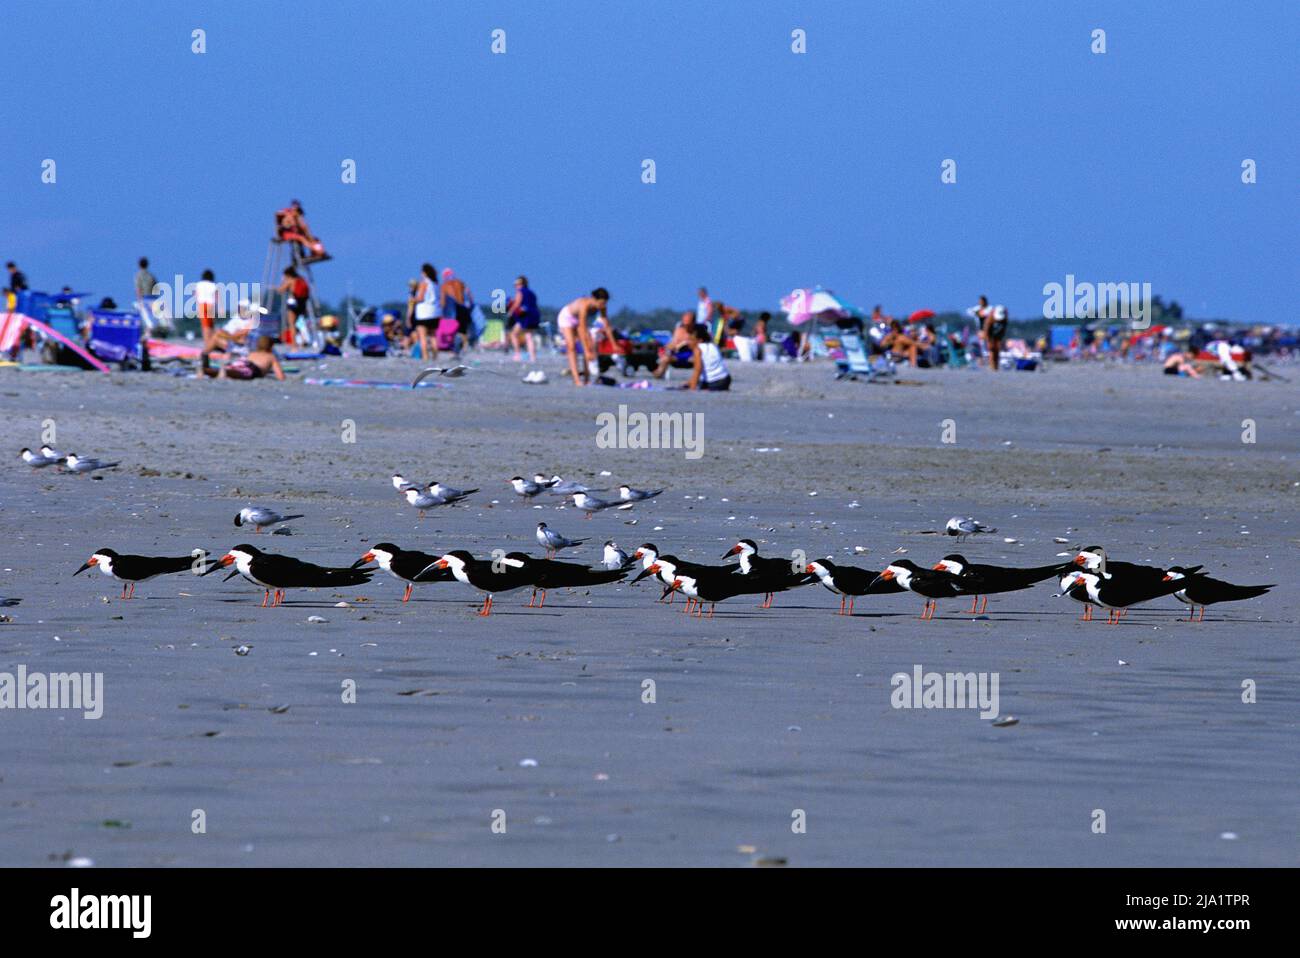 Beach scenic with people and shorebirds coexisting Stock Photo